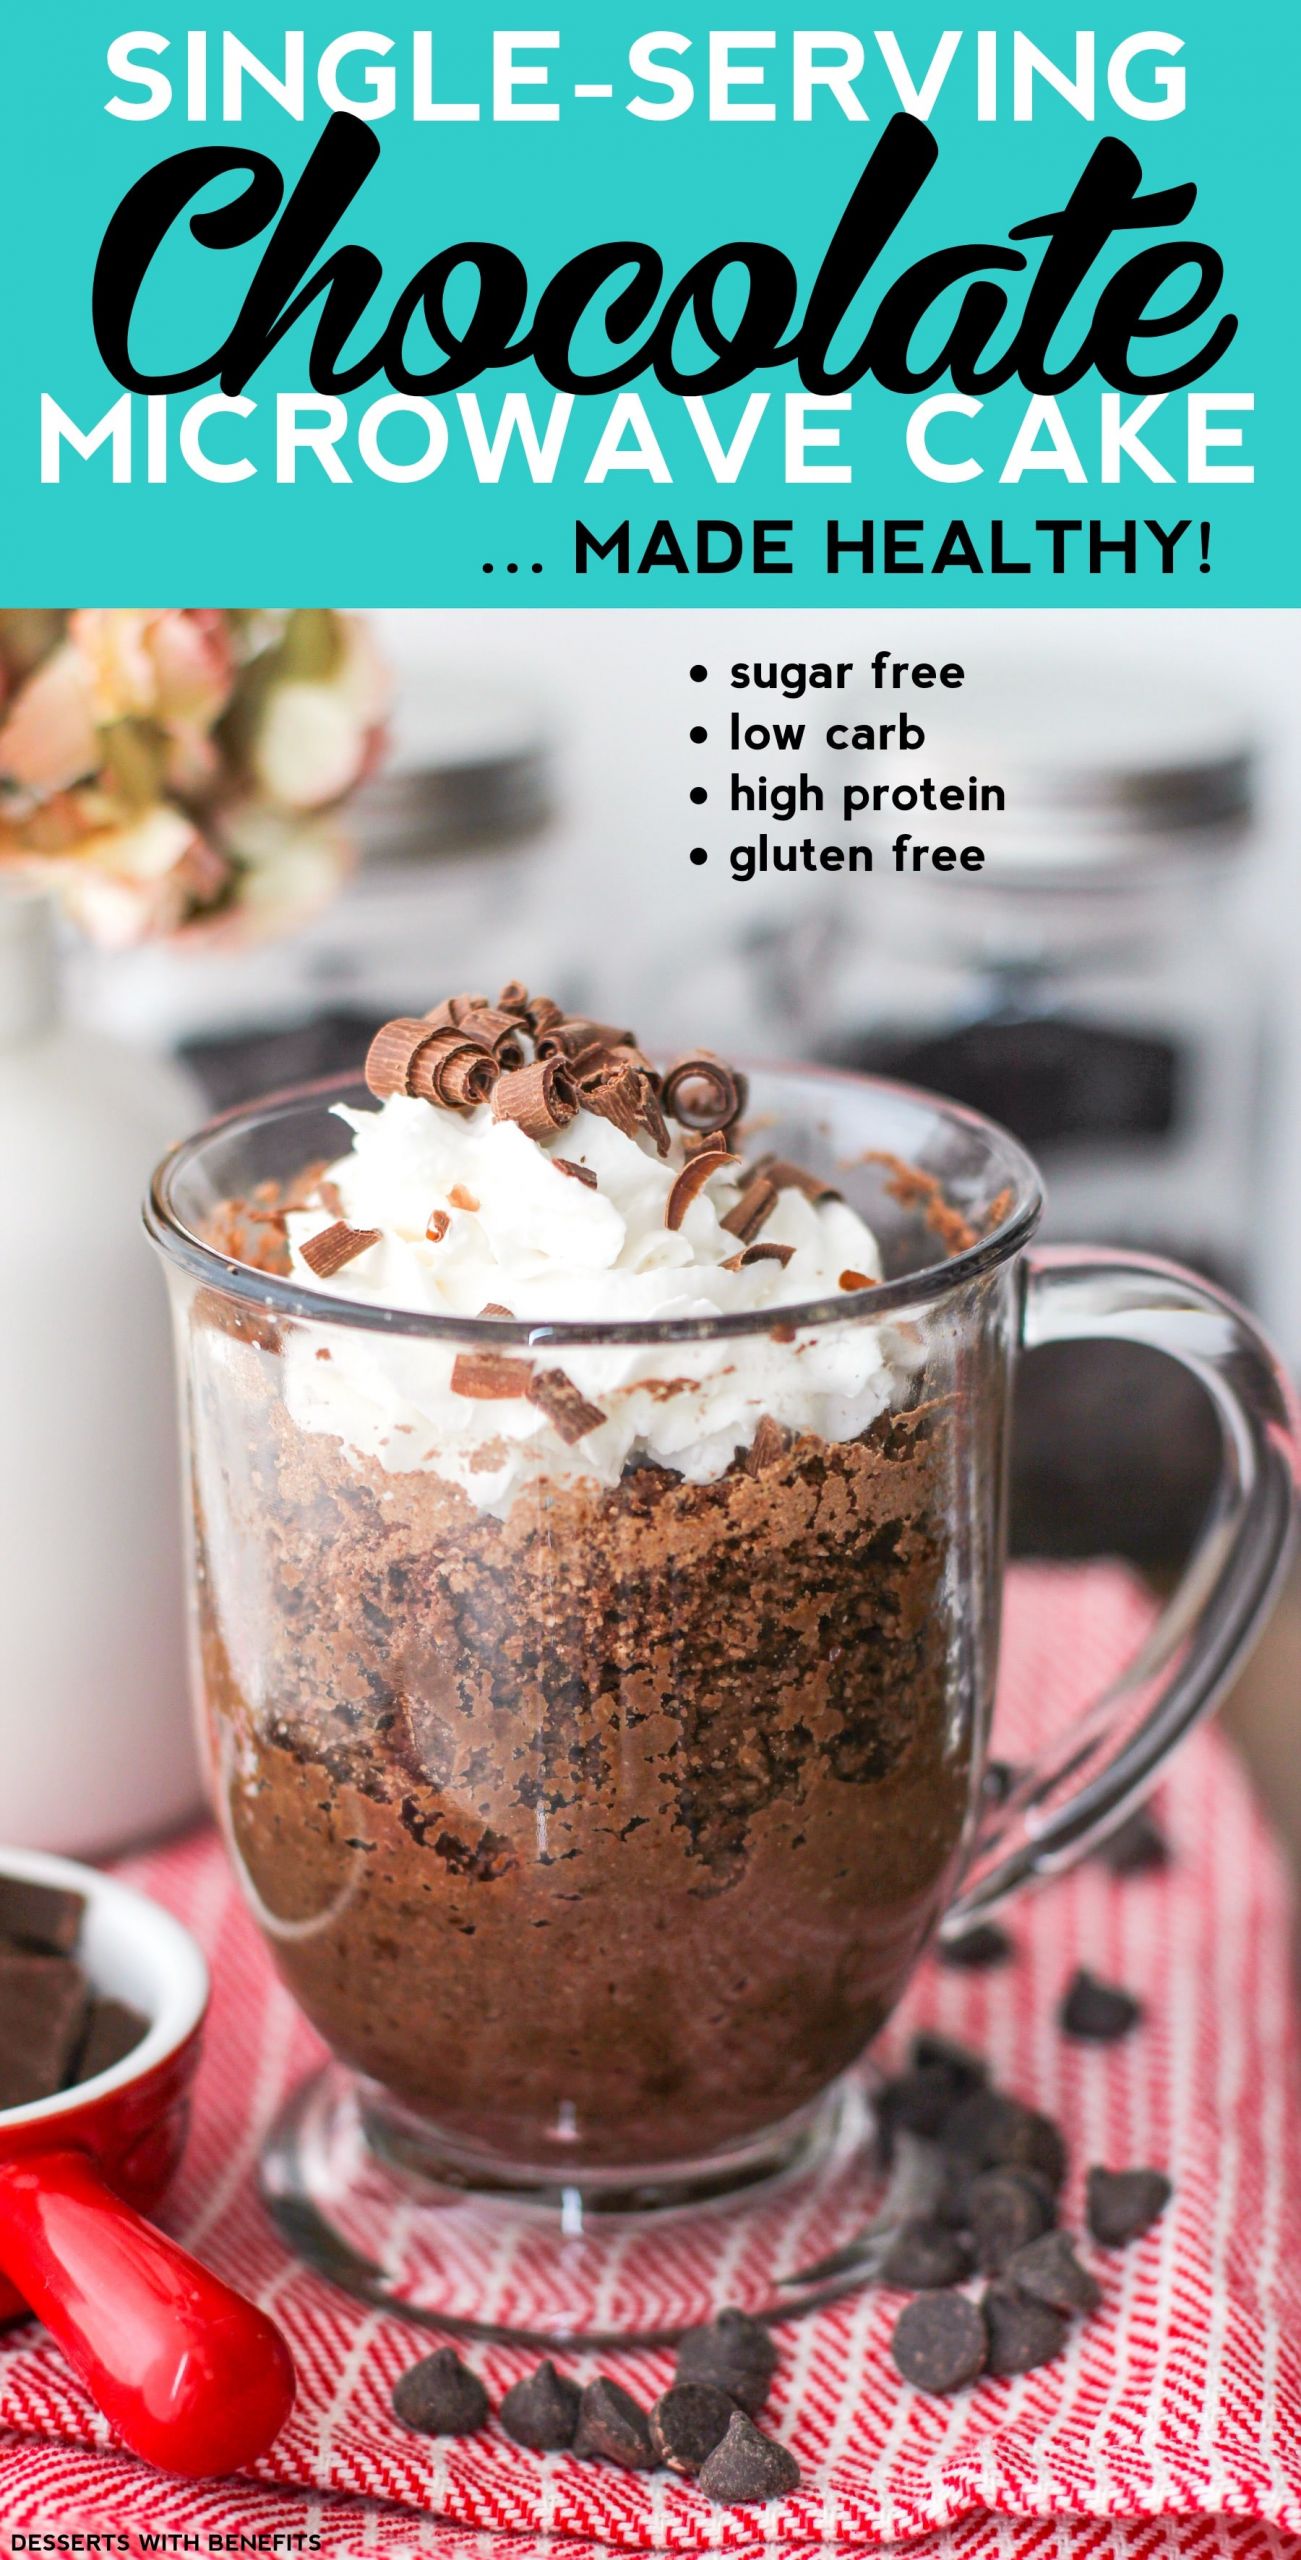 Single Serving Microwave Desserts
 Healthy Single Serving Chocolate Microwave Cake